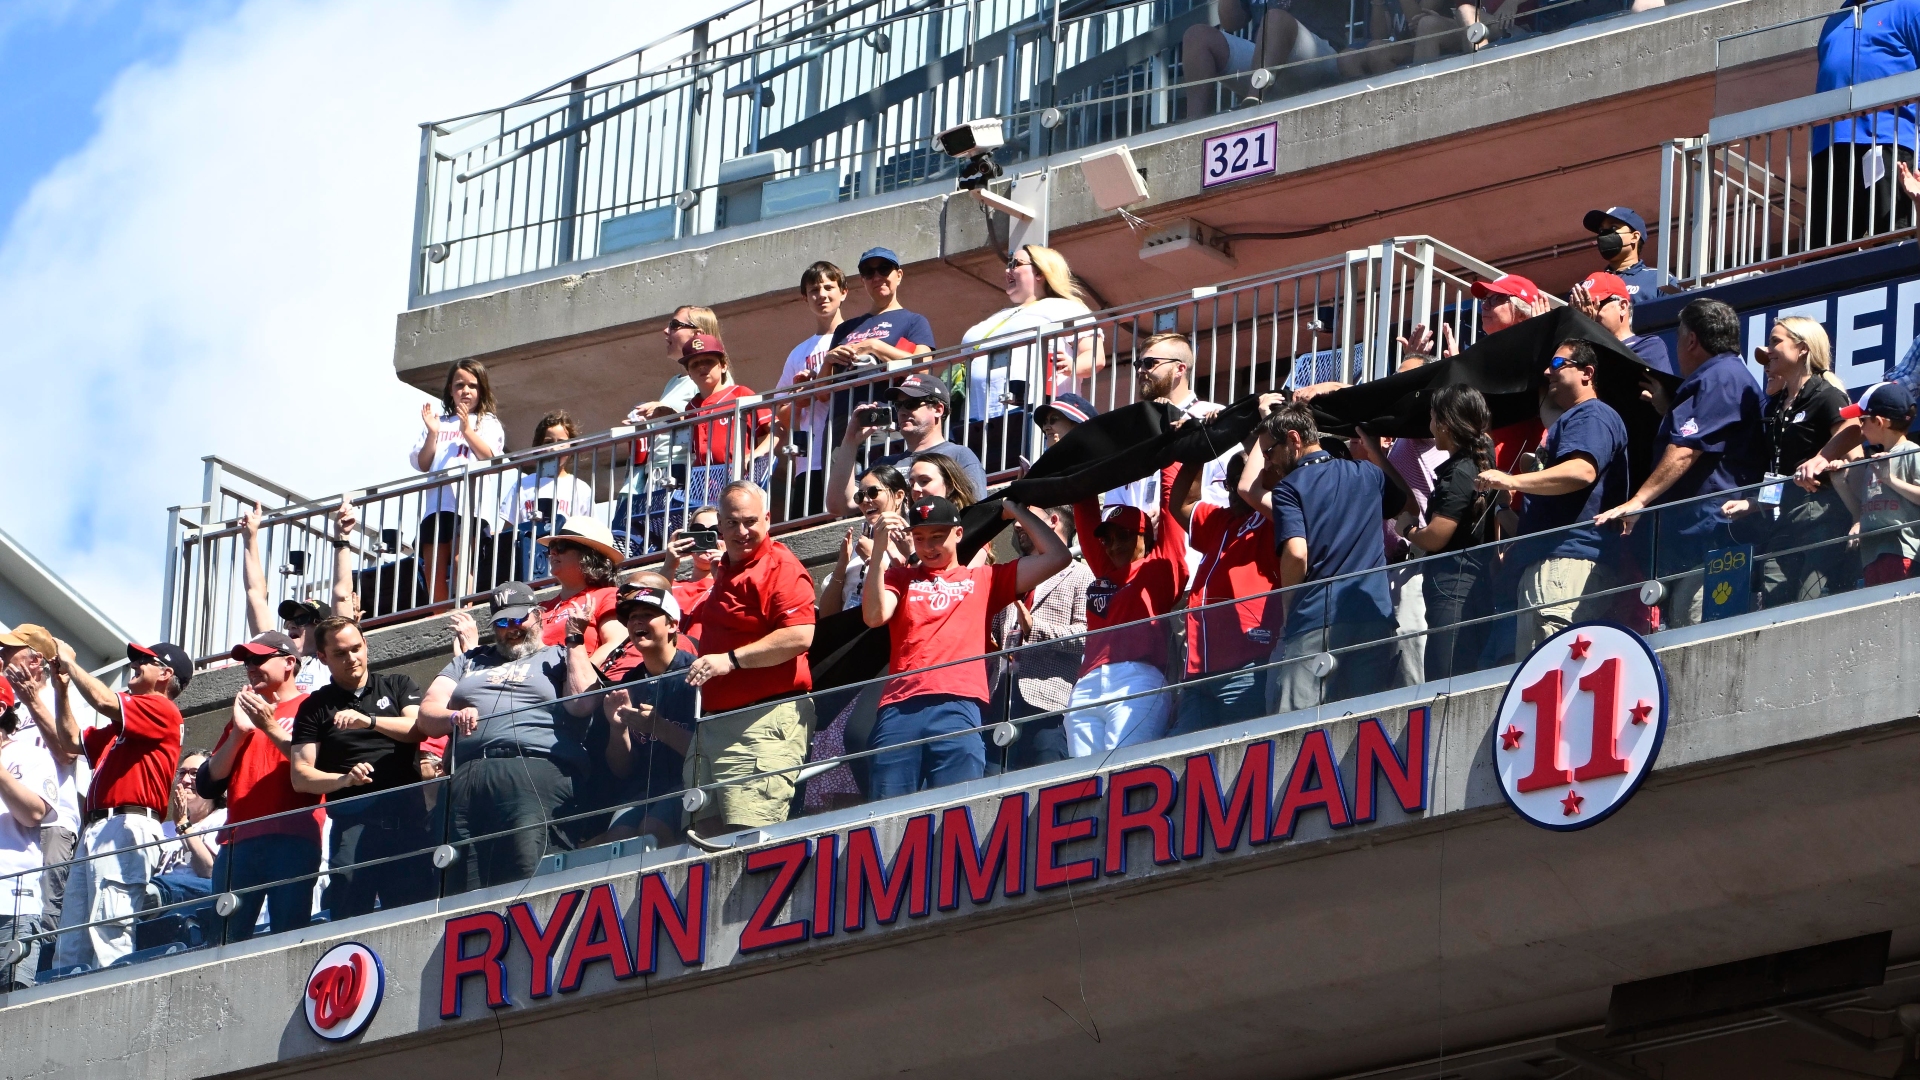 Fans reveal new Ryan Zimmerman signage at Nationals Park